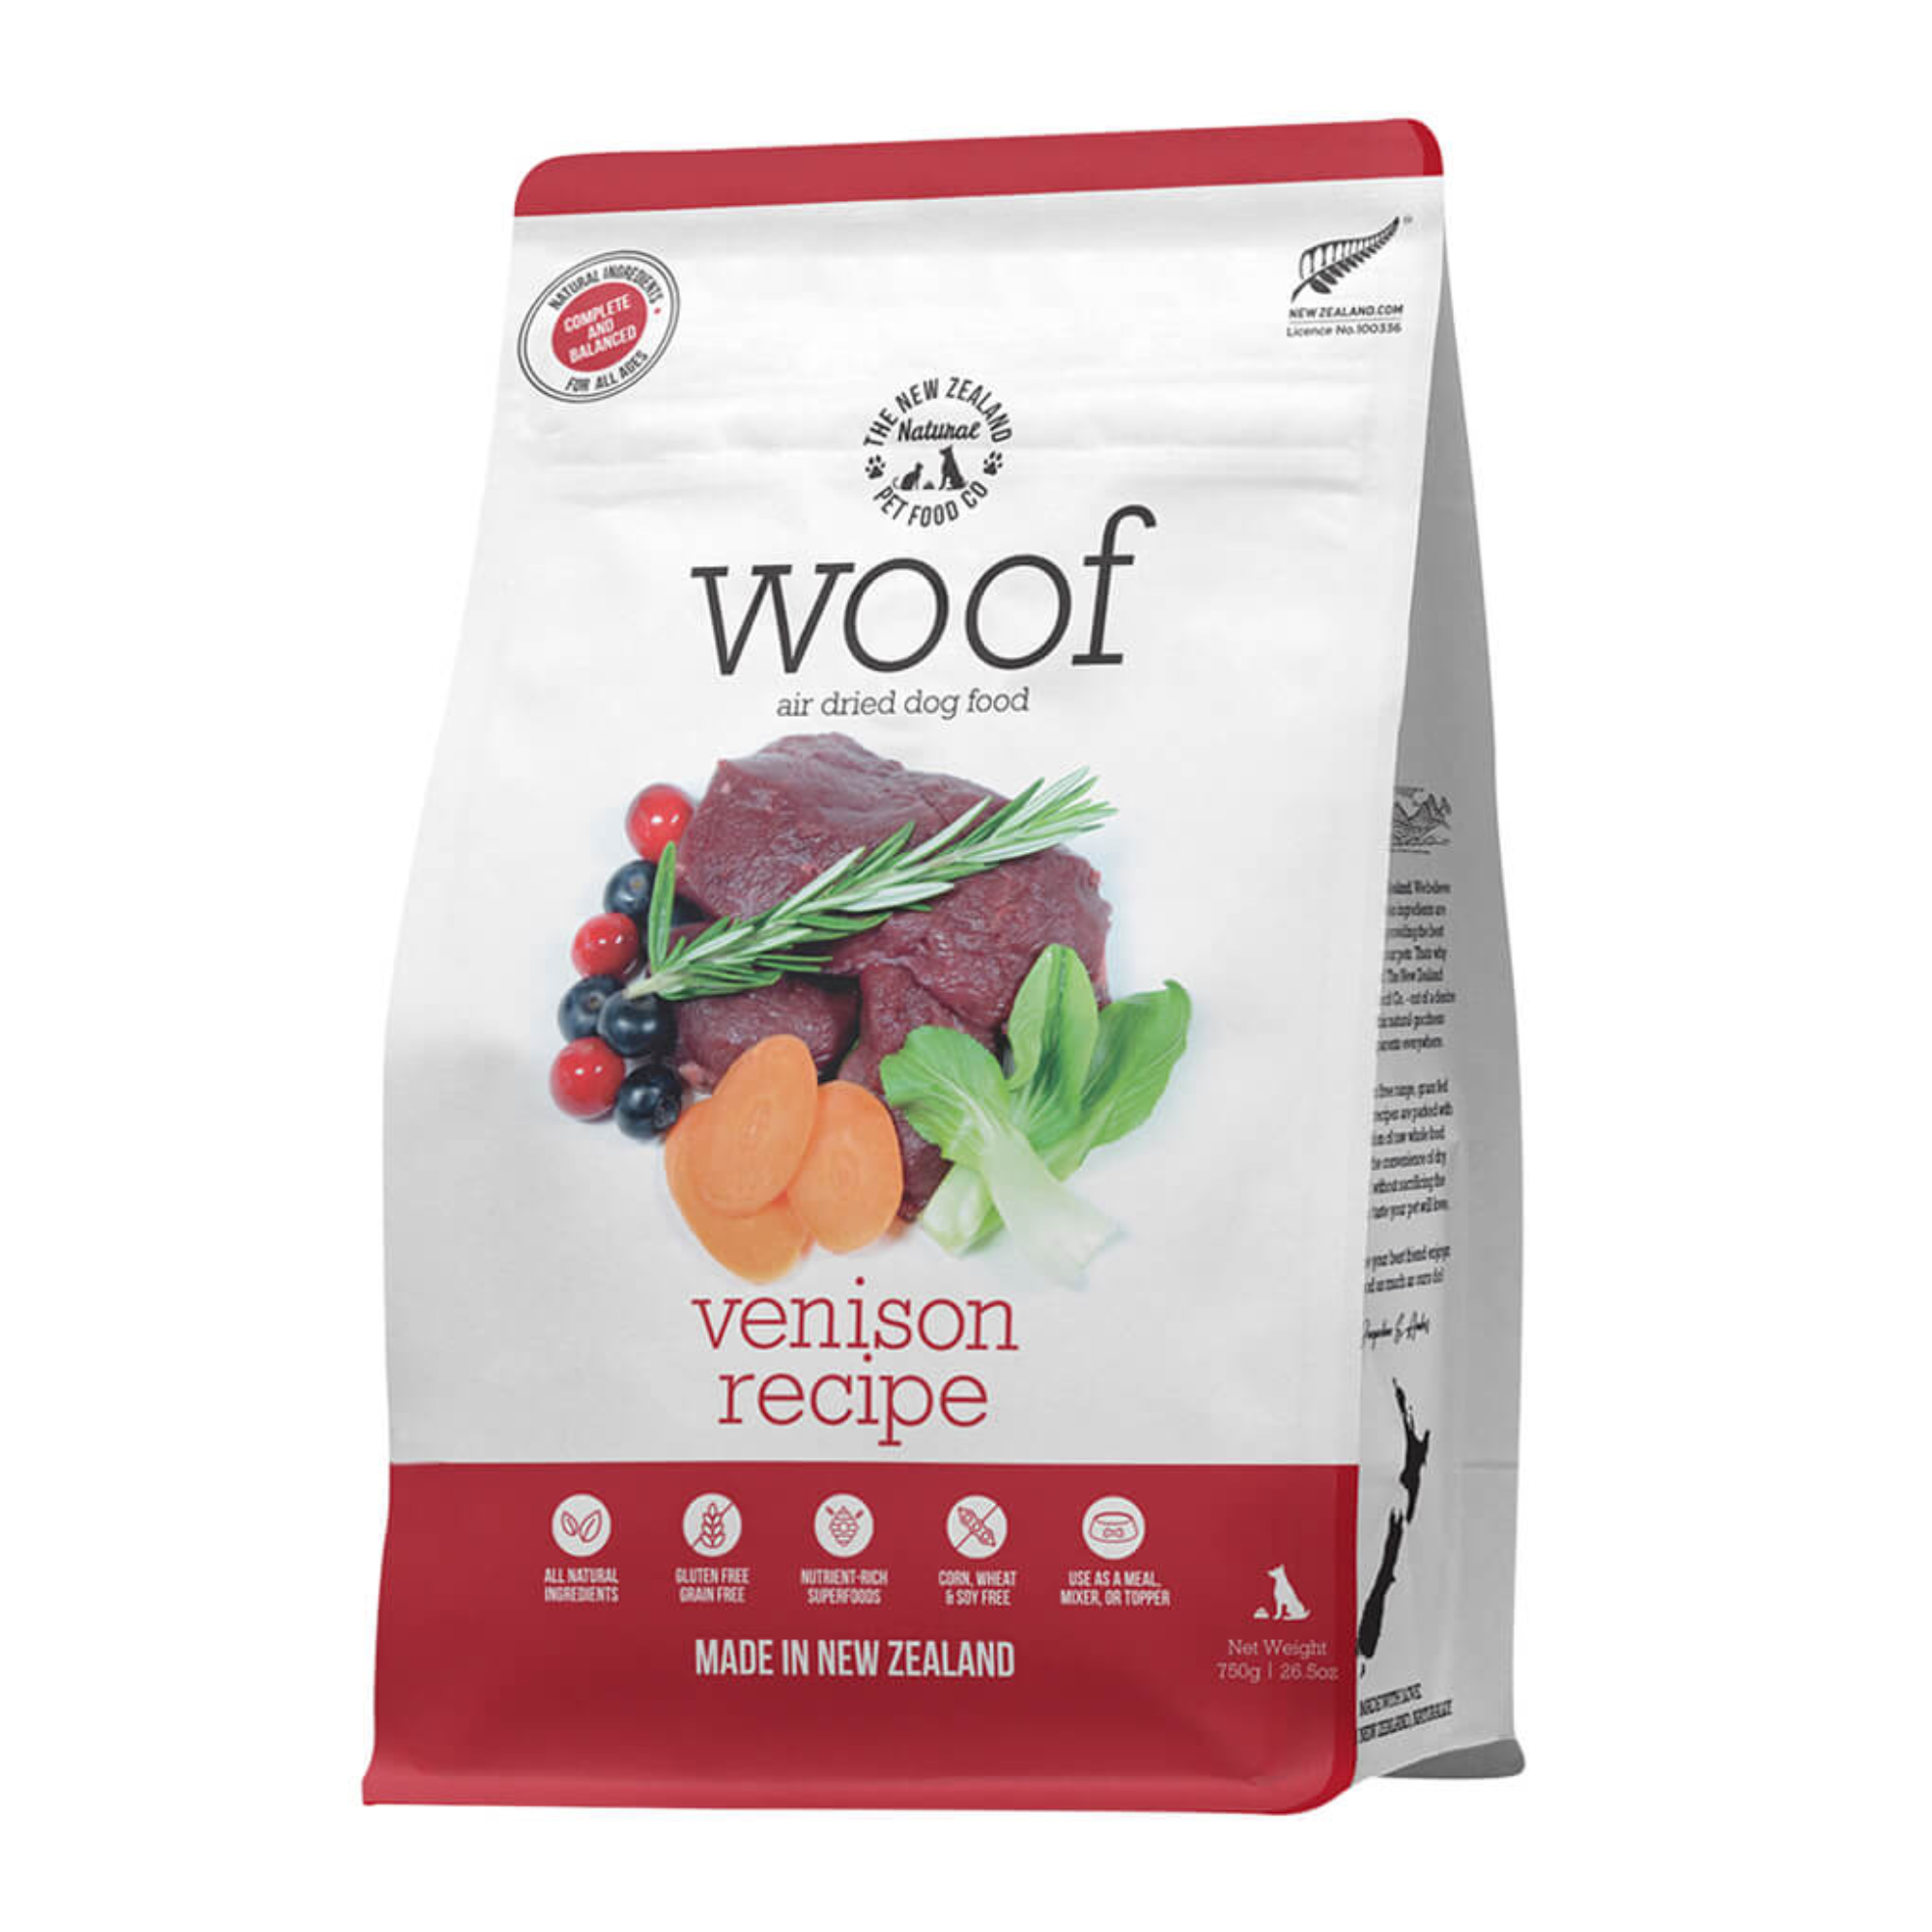 New Zealand Natural Pet Food Co. Woof Air Dried Venison Recipe